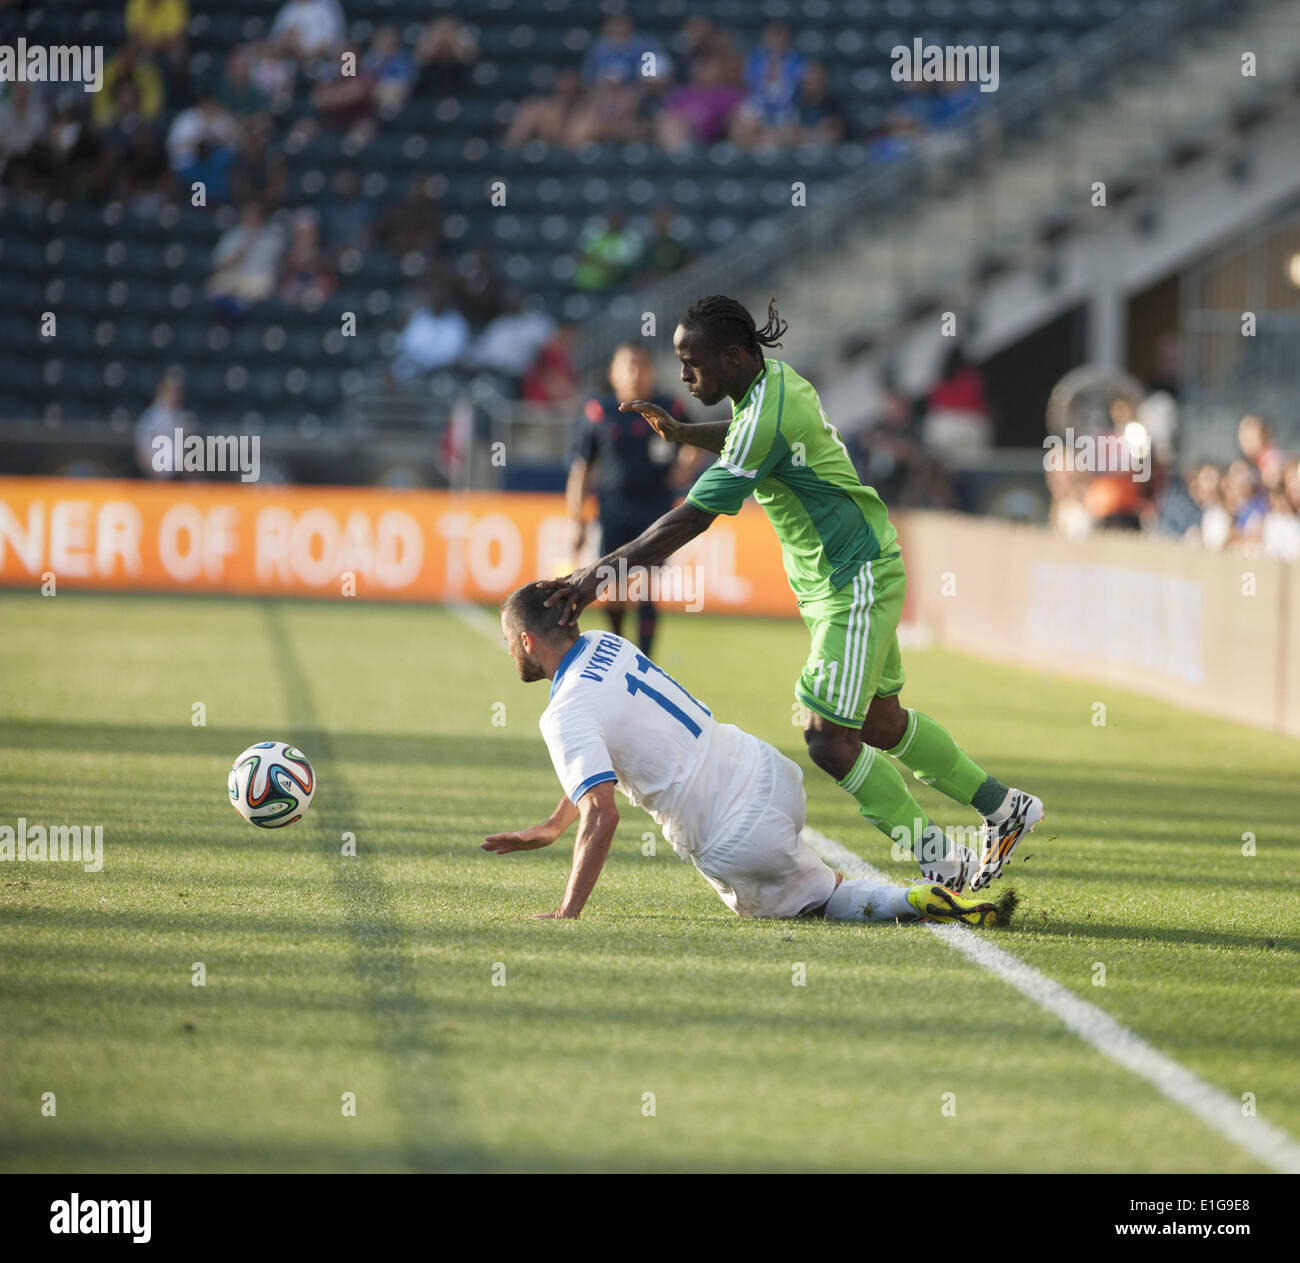 Chester, Pennsylvania, USA. 3rd June, 2014. VICTOR MOSES (11) of Nigeria in action against LOUKAS VYNTRA (11) of Greece at PPL Park in Chester Pa © Ricky Fitchett/ZUMAPRESS.com/Alamy Live News Stock Photo